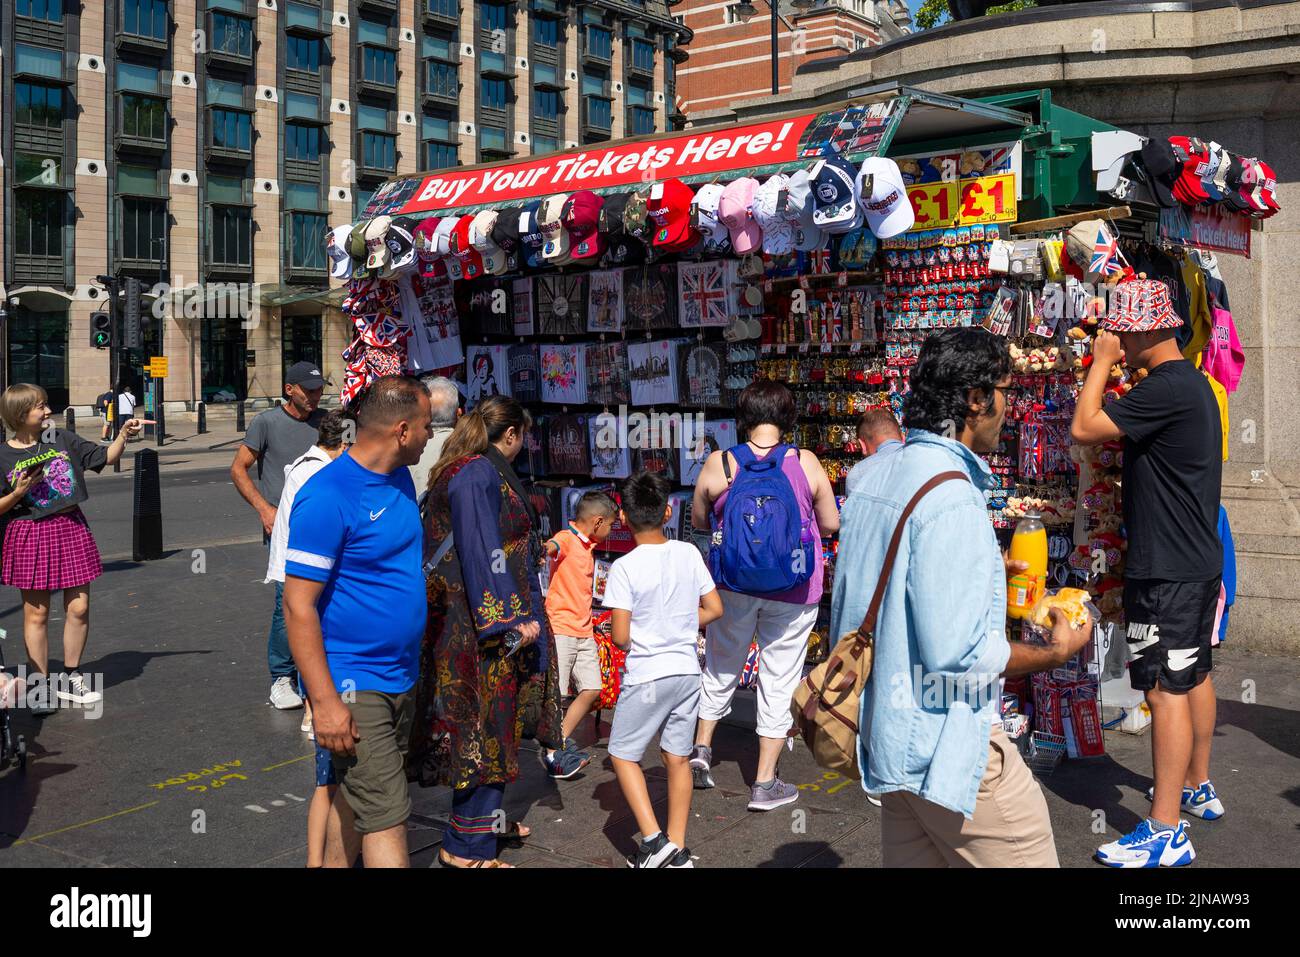 Souvenir stand on the end of Westminster Bridge selling British gifts for tourists. London and British souvenirs on display for sale. People looking Stock Photo